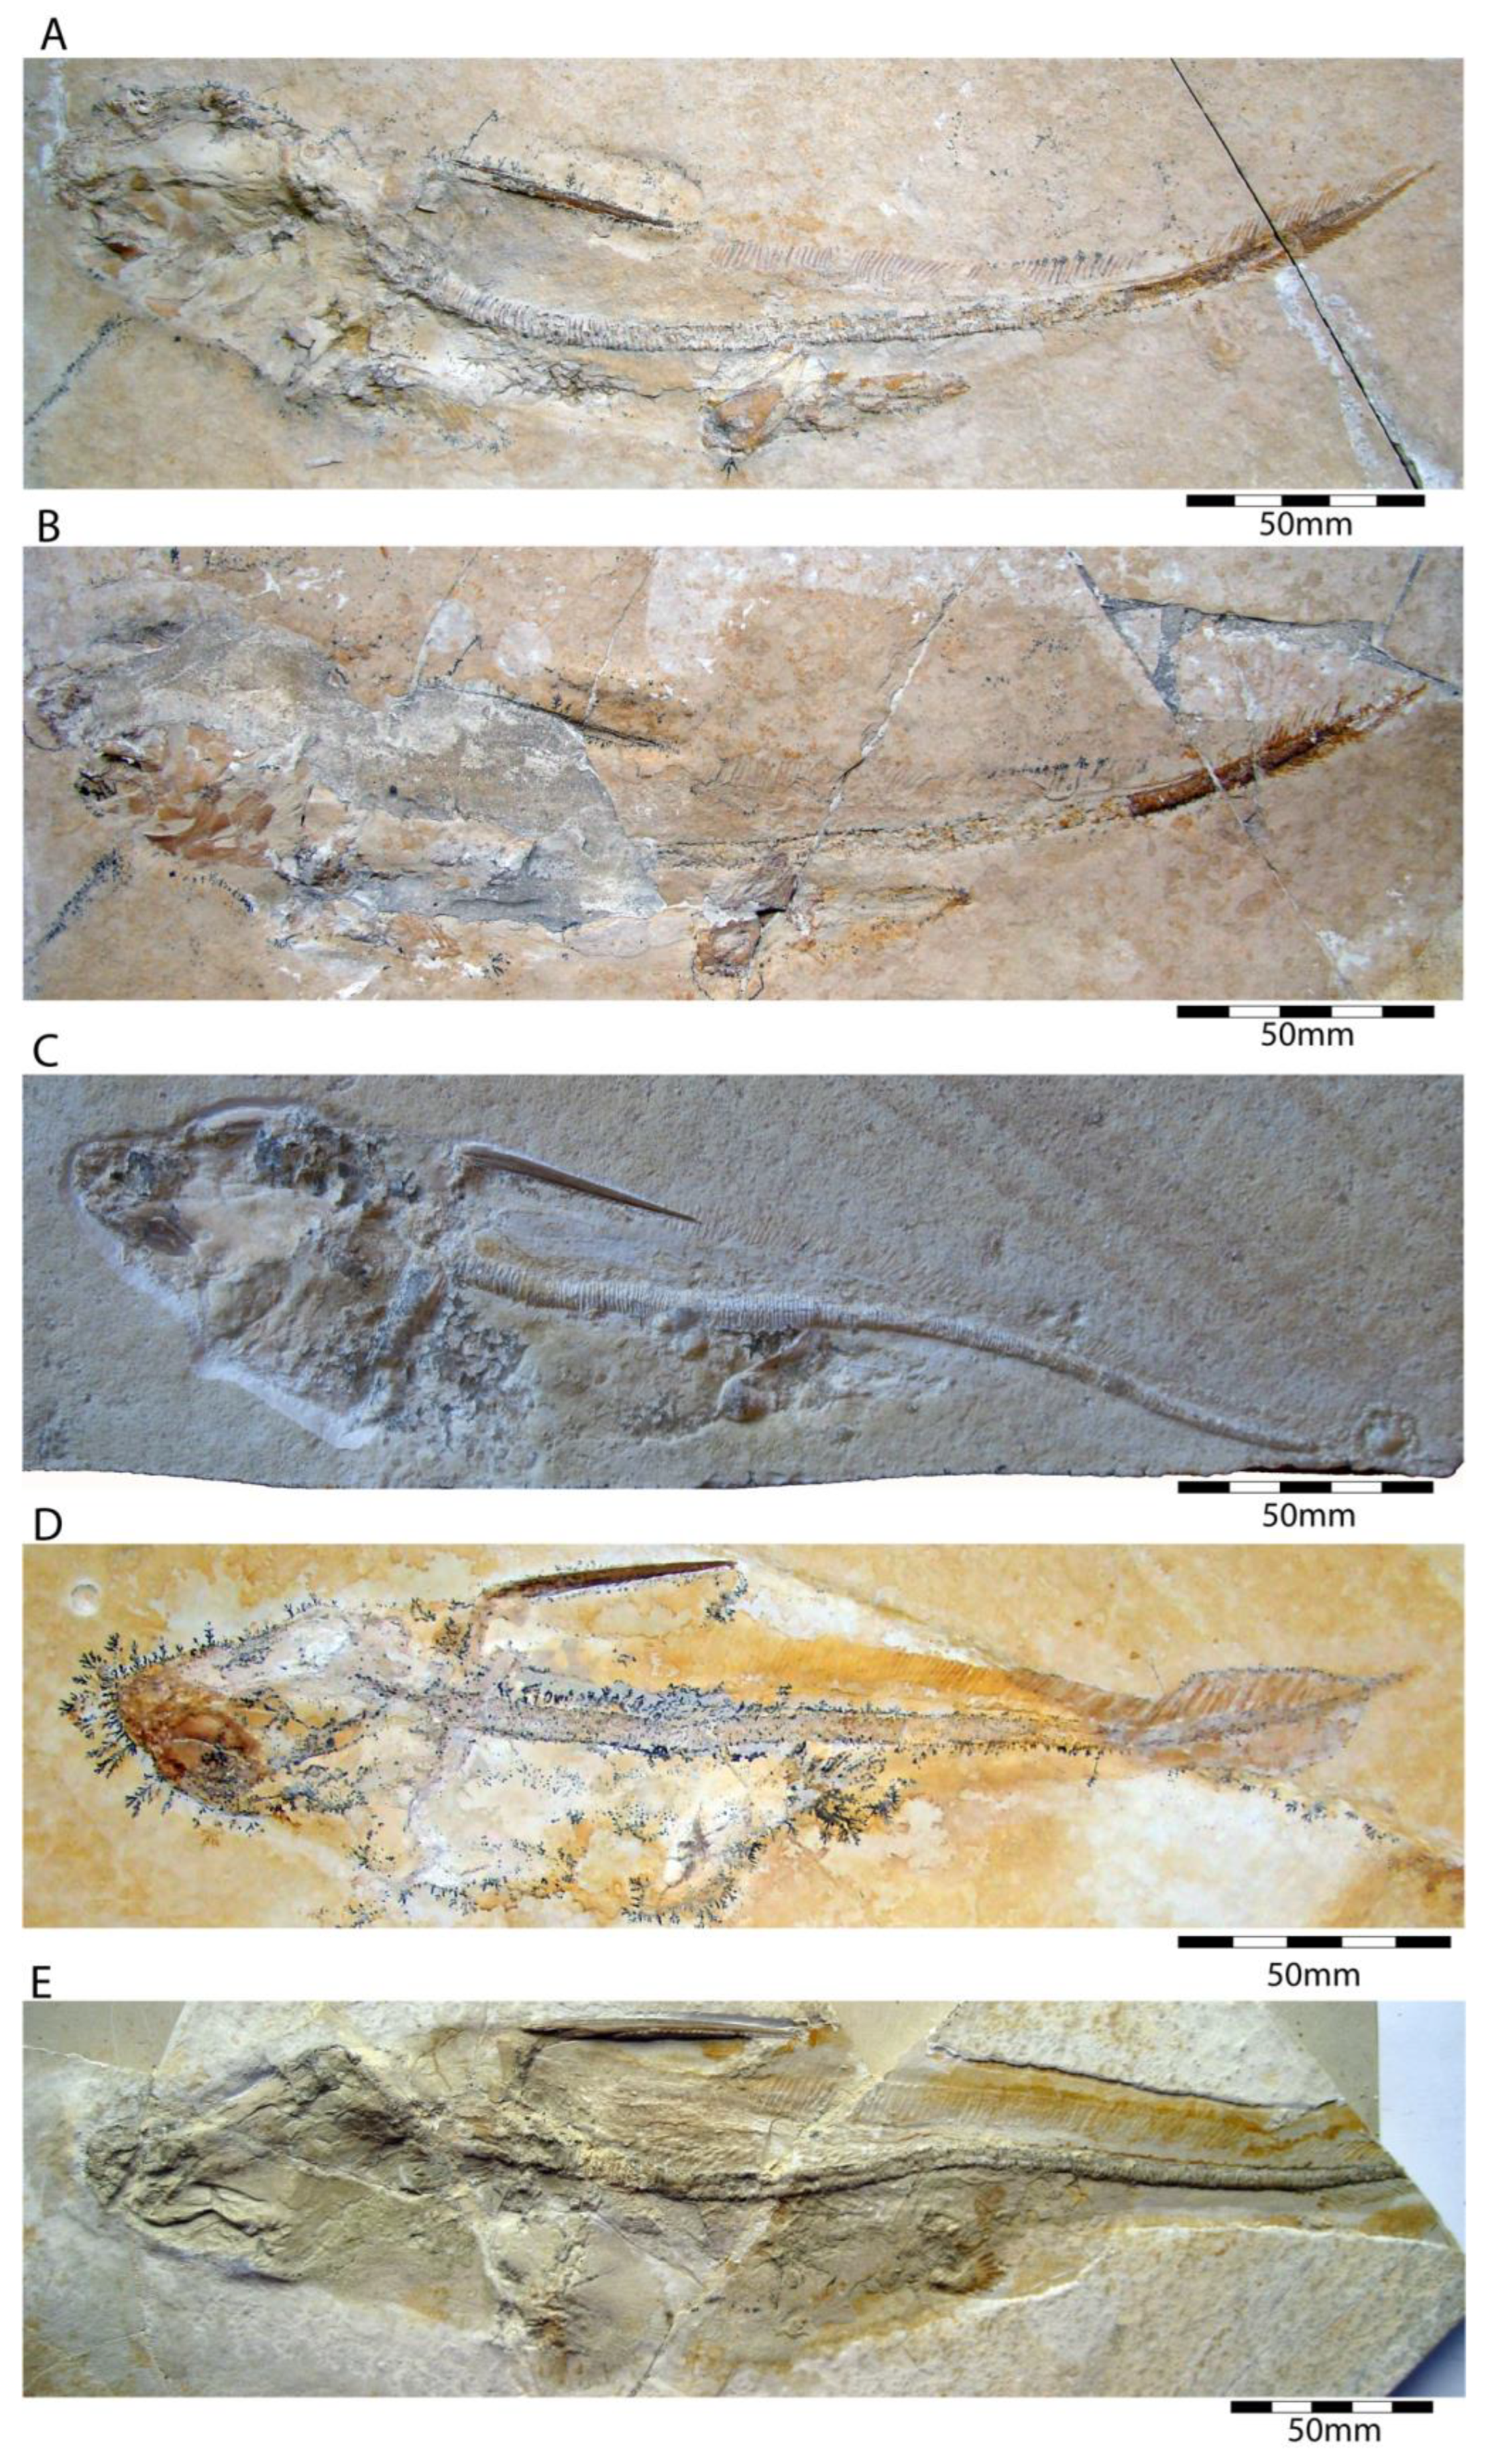 Diversity | Free Full-Text | A Synoptic Review of the Cartilaginous Fishes  (Chondrichthyes: Holocephali, Elasmobranchii) from the Upper Jurassic  Konservat-Lagerst&auml;tten of Southern Germany: Taxonomy, Diversity, and  Faunal Relationships